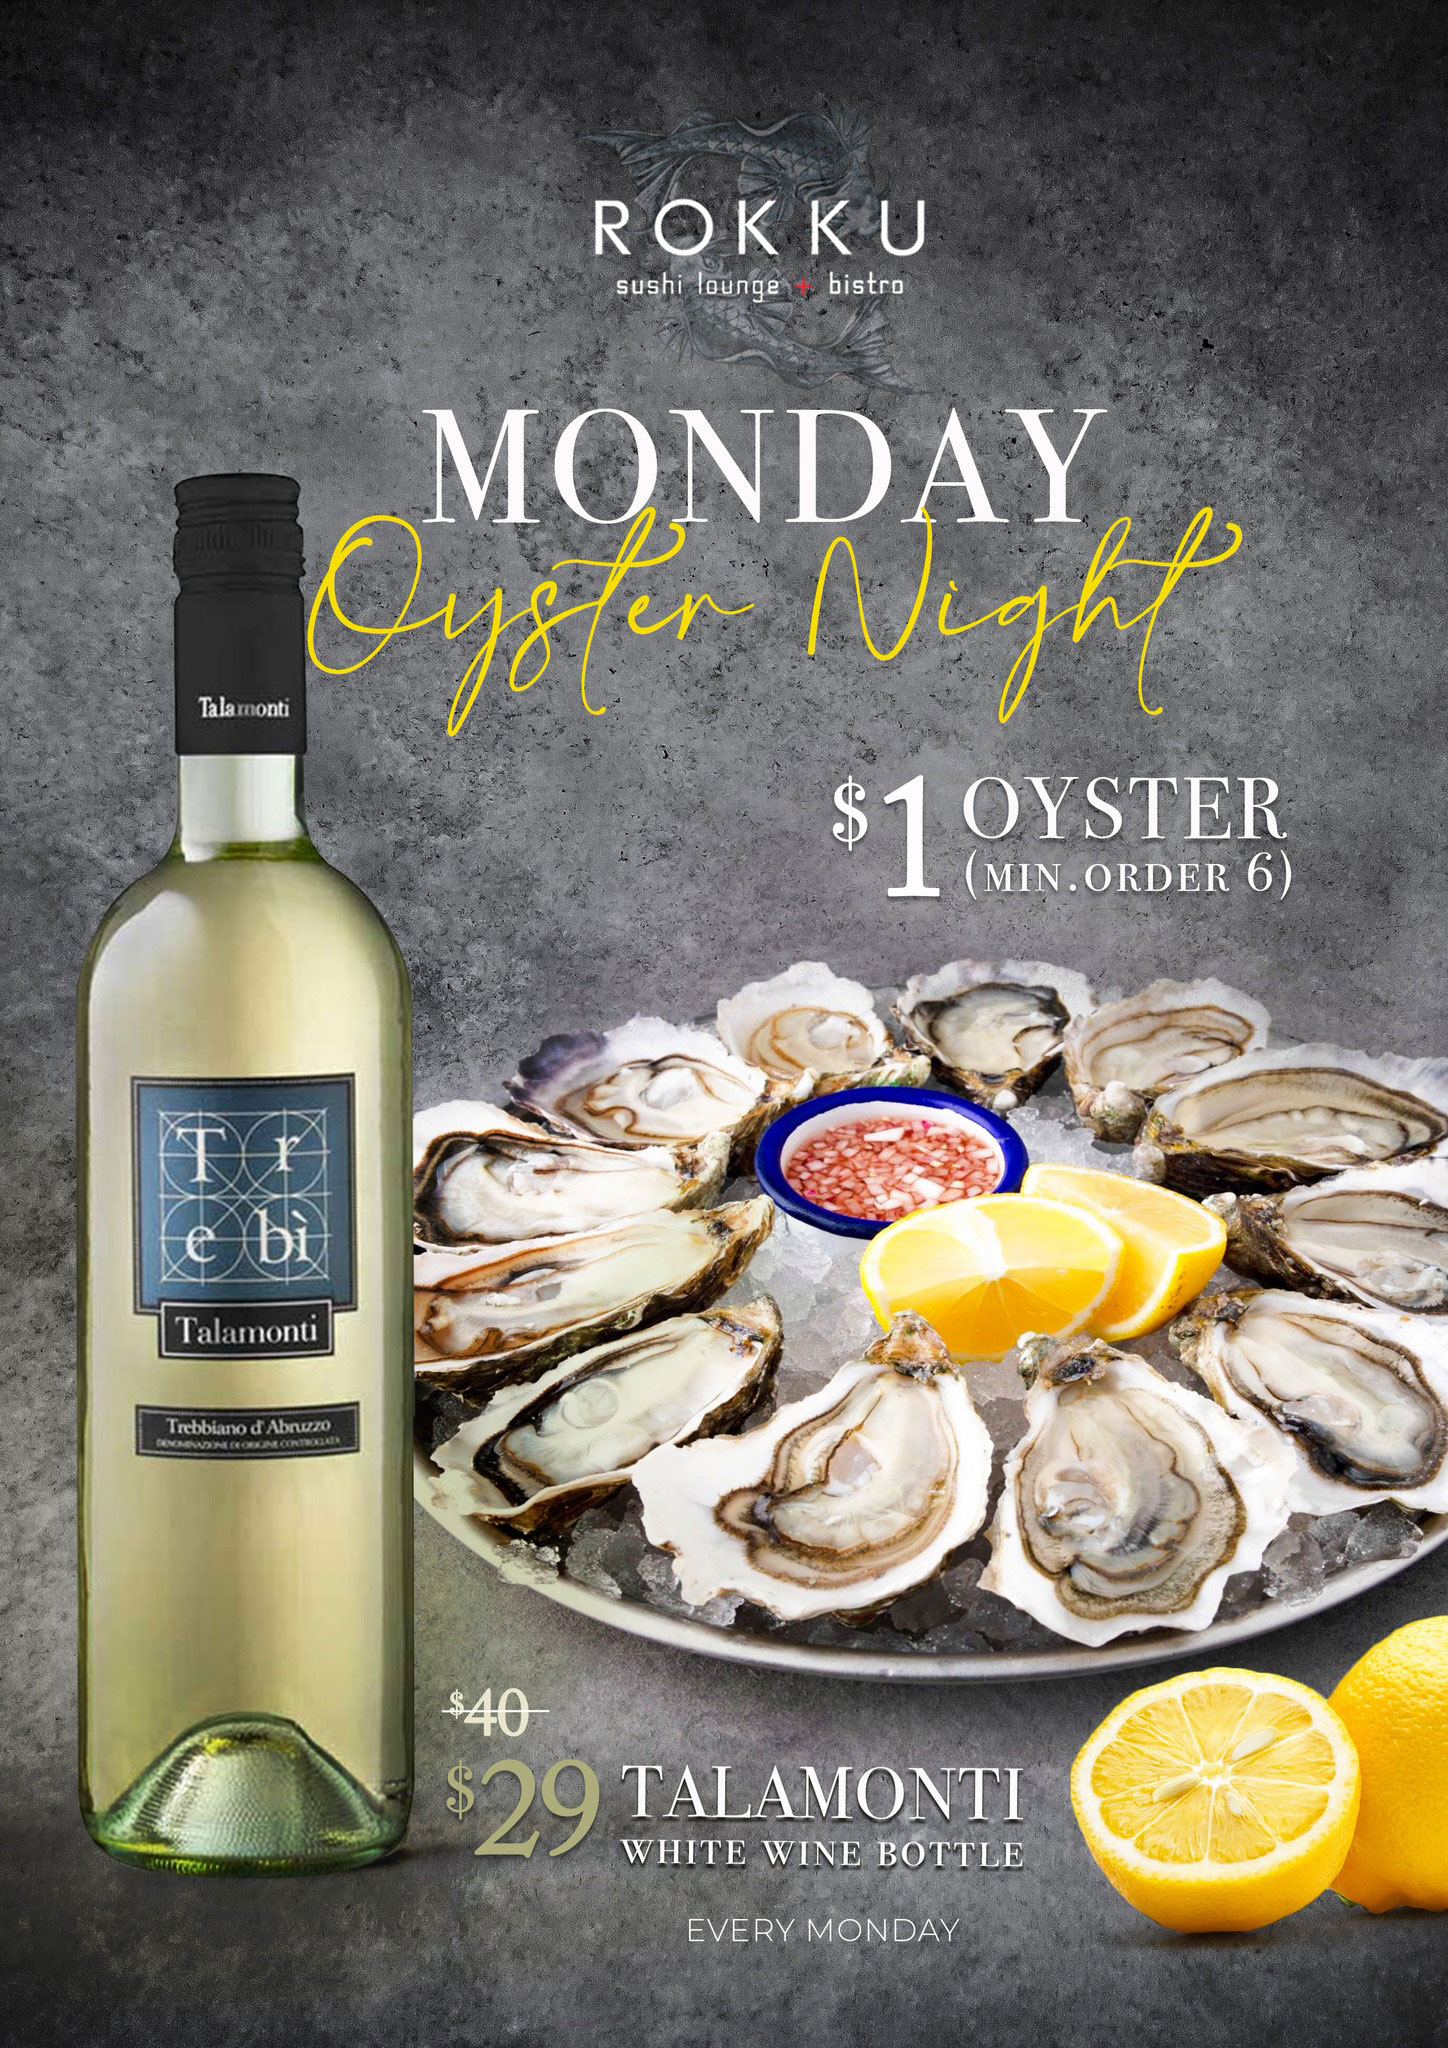 MONDAY OYSTER NIGHT AT ROKKU ON MARCH 21ST